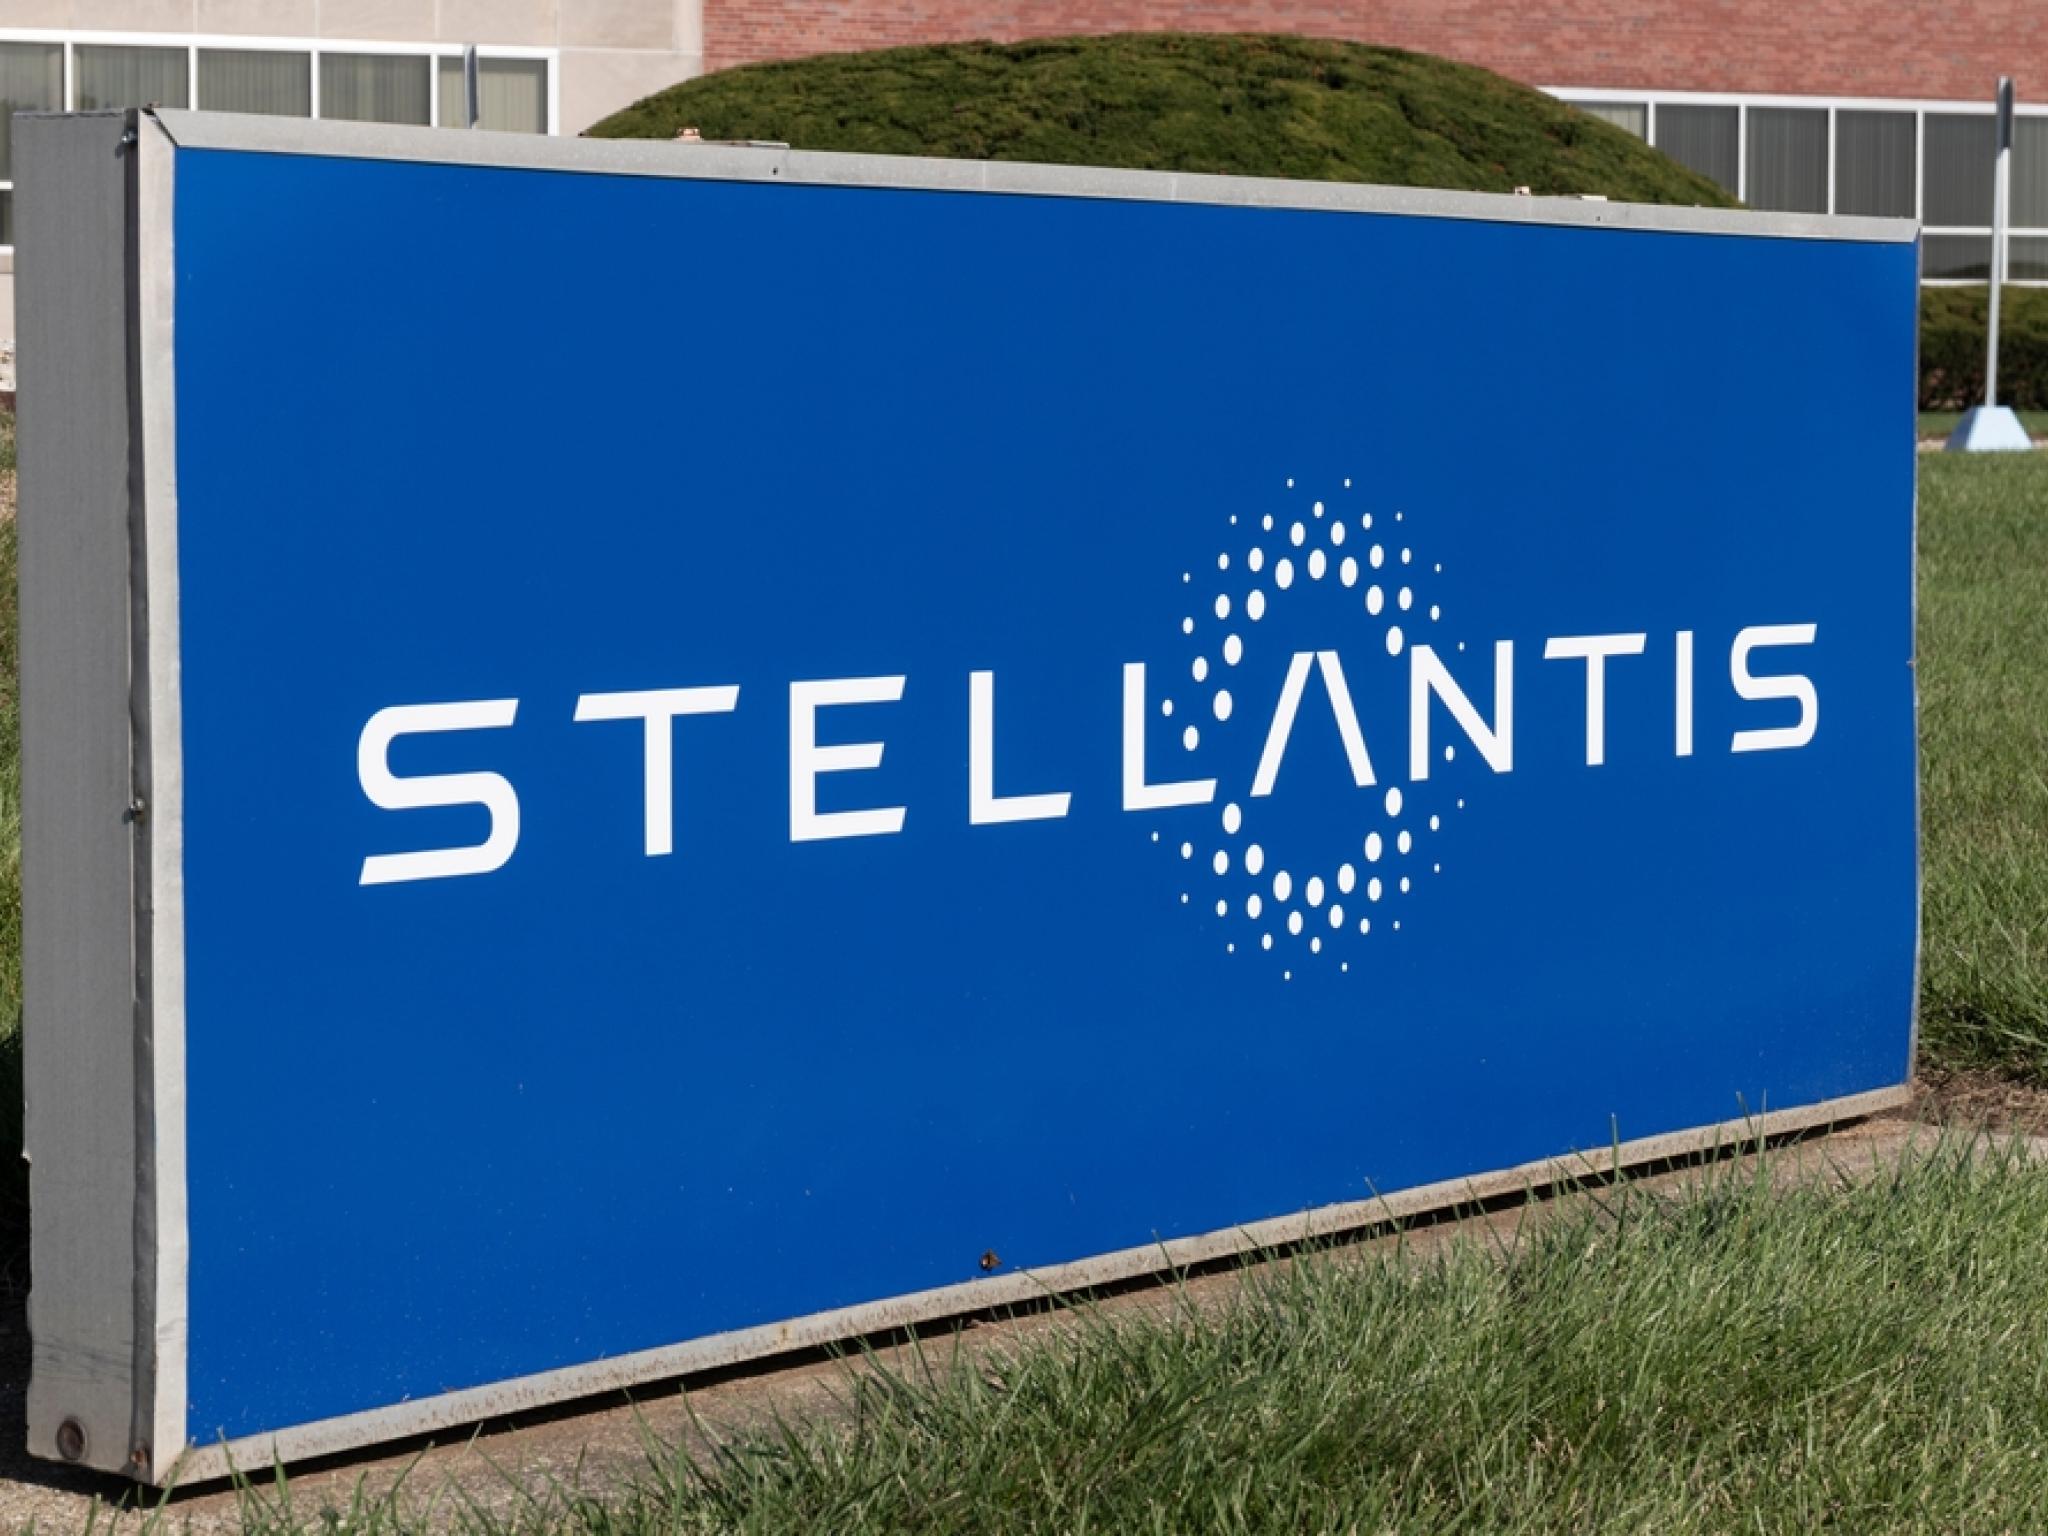  whats-going-on-with-chrysler-parent-stellantis-stock-today 